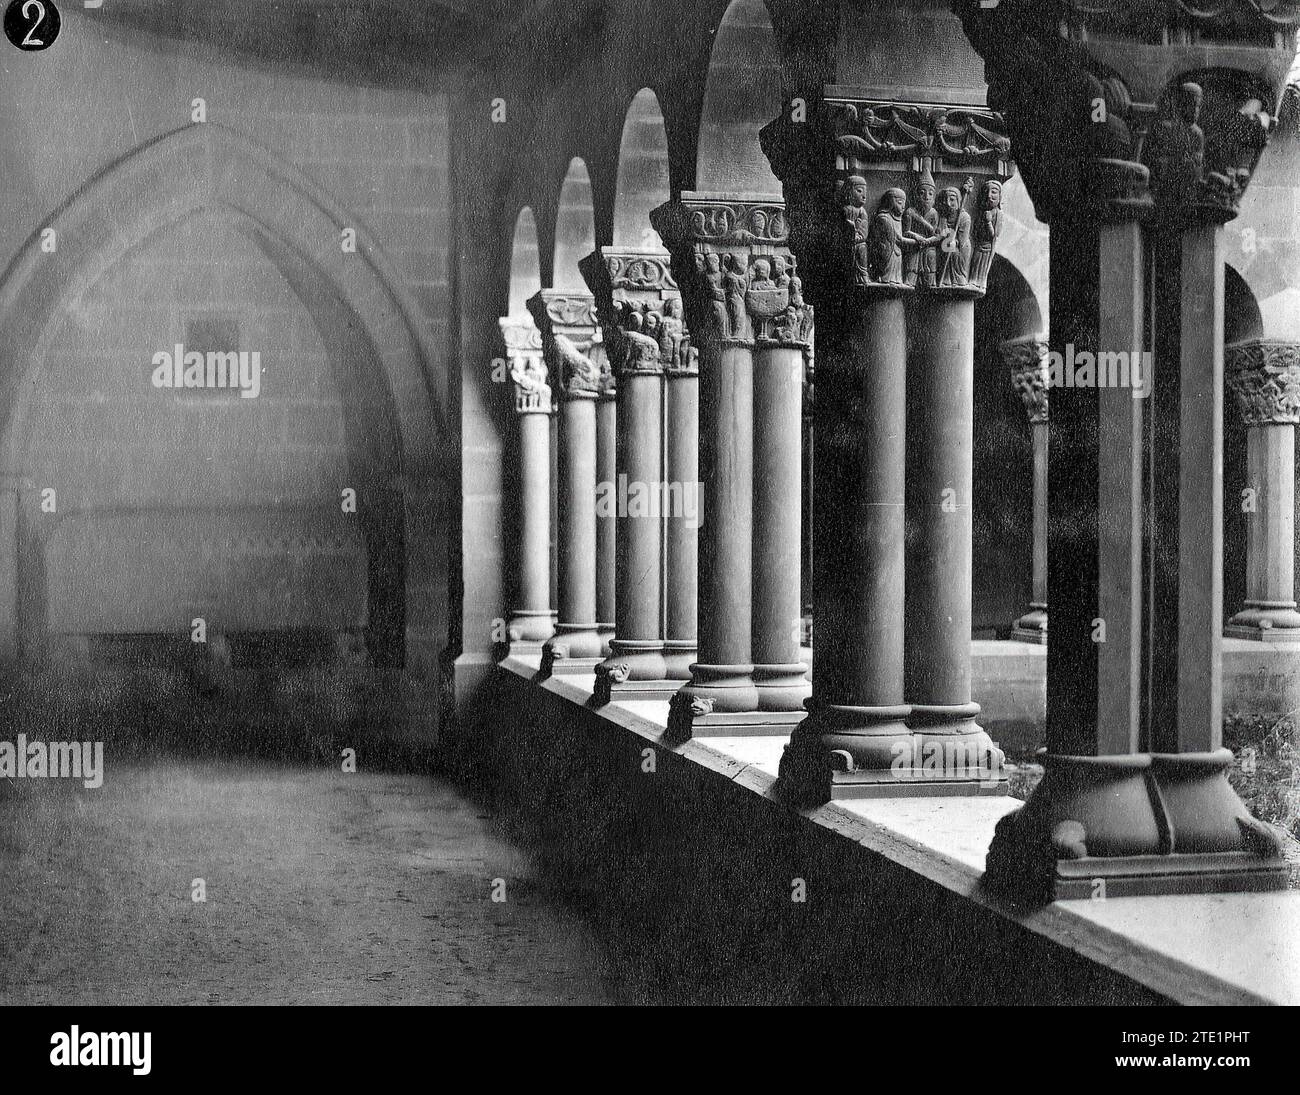 Huesca, 1920 (CA.) Cloister of San Pedro El Viejo, where the remains of King Alfonso I have been reburied. The Benedictine building constitutes a main work of the Aragonese Romanesque (1116-1158), located in the old medieval neighborhood of the Alquibla, where a temple was already erected in times of the Visigoths and Mozarabs. The cloister stands out, which belongs to the so-called European Romanesque, it is the work of the anonymous sculptor called Maestro de San Juan de la Peña. Credit: Album / Archivo ABC / Enrique Capella Stock Photo